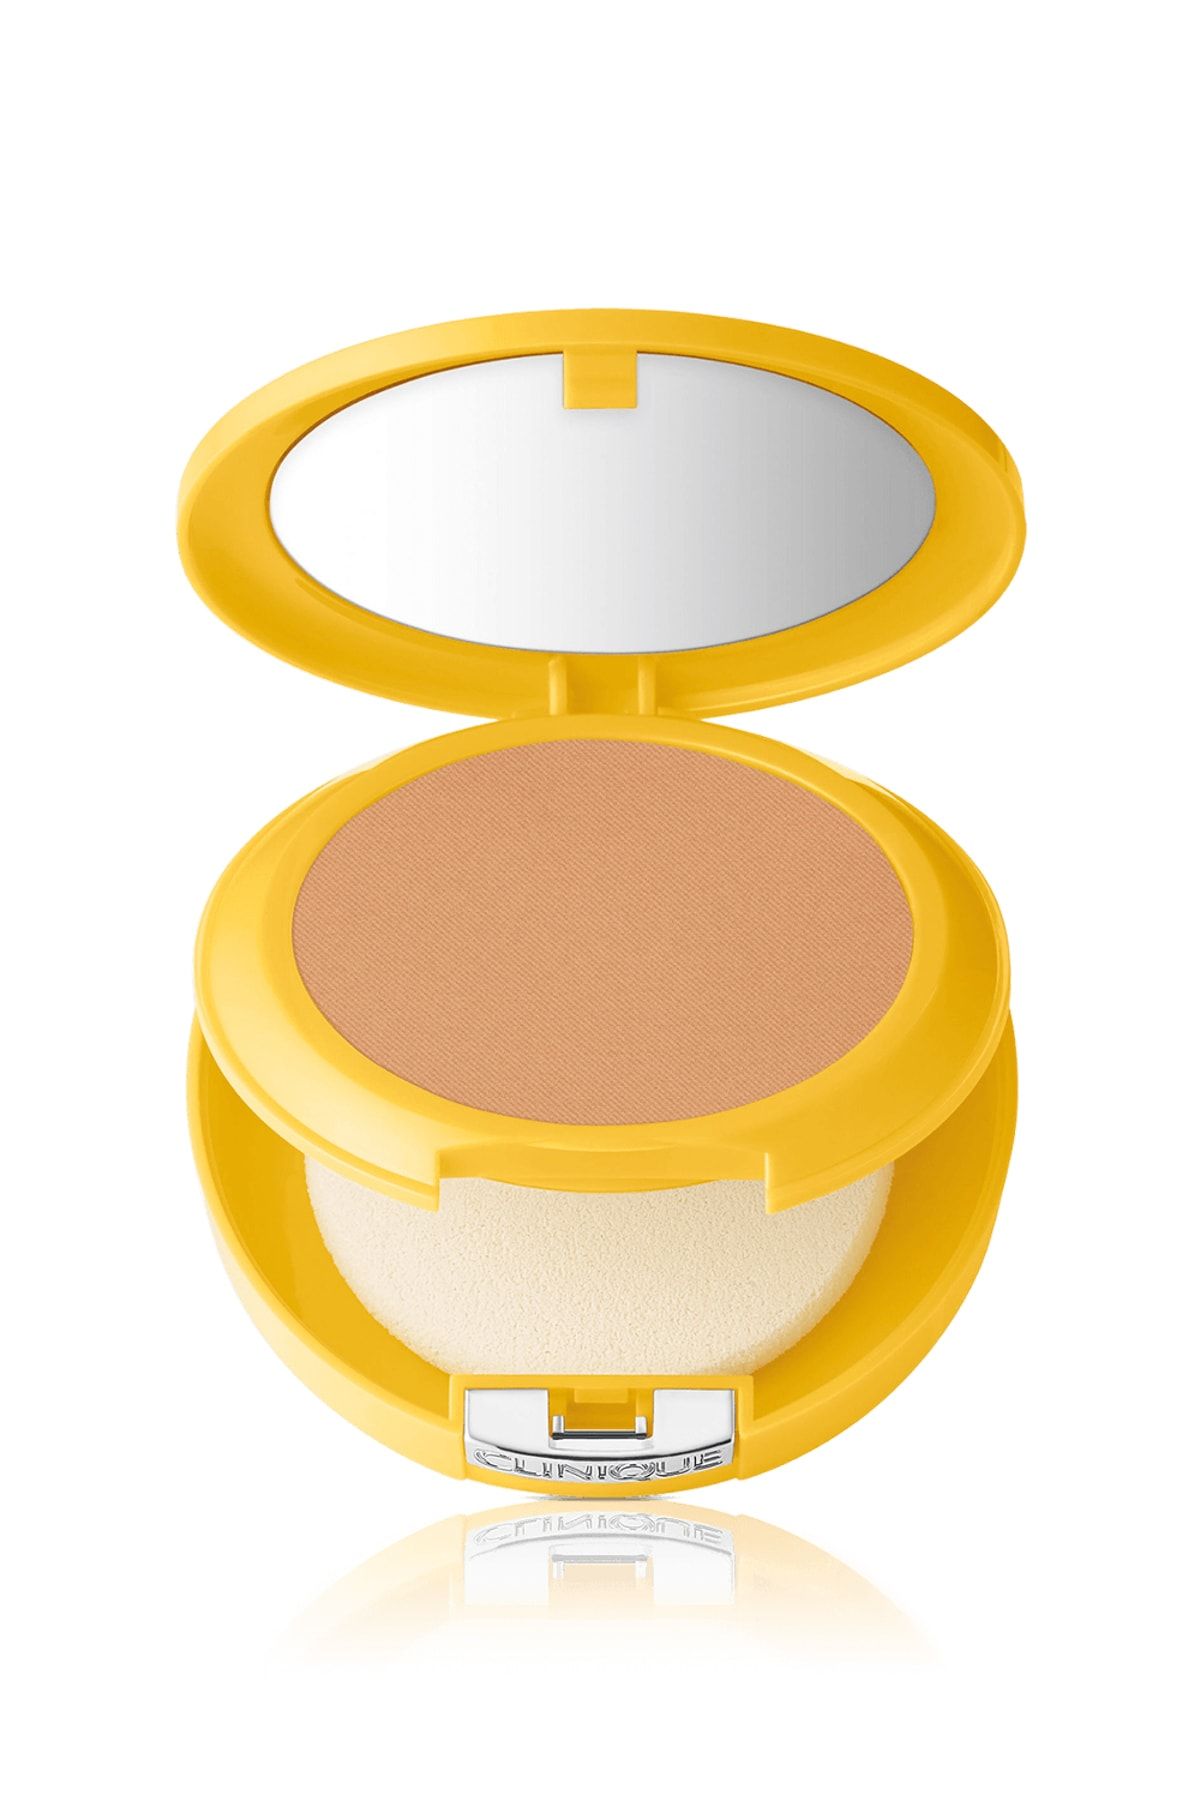 Clinique Mineral Pudra - Mineral Powder Makeup Spf 30 Moderately Fair 020714782412